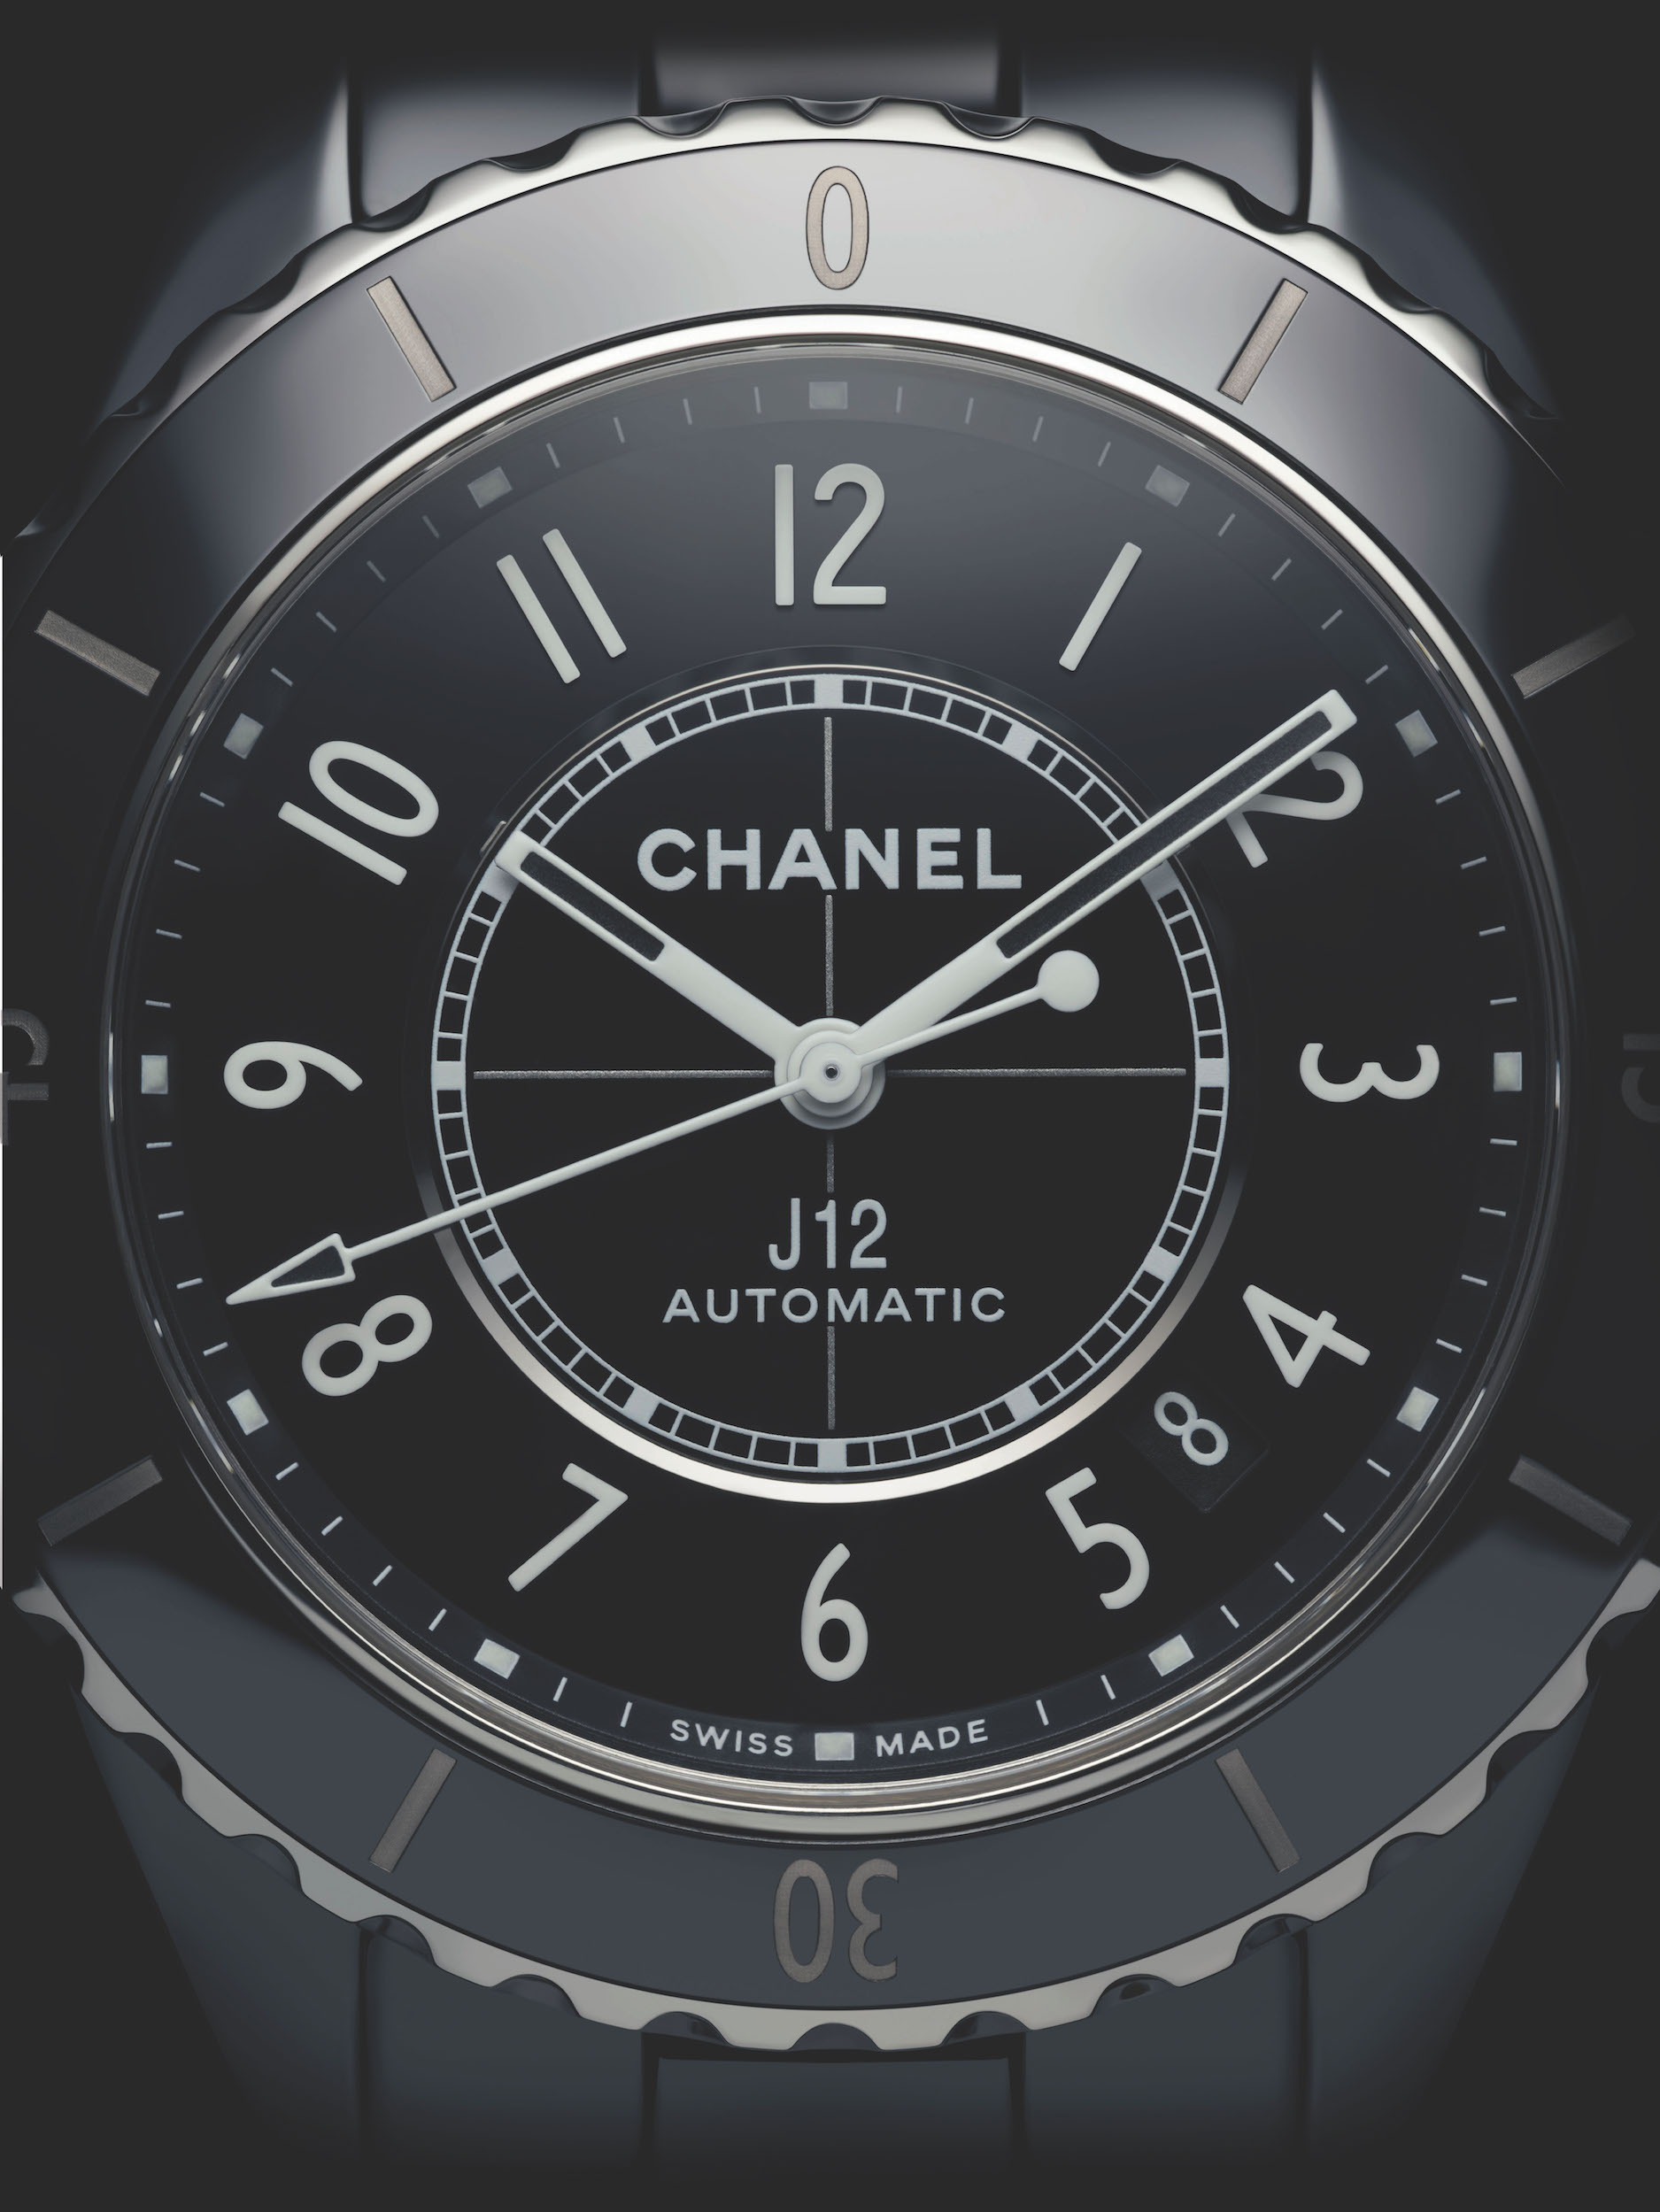 Watch Wednesday: Chanel J12 – SURFACE